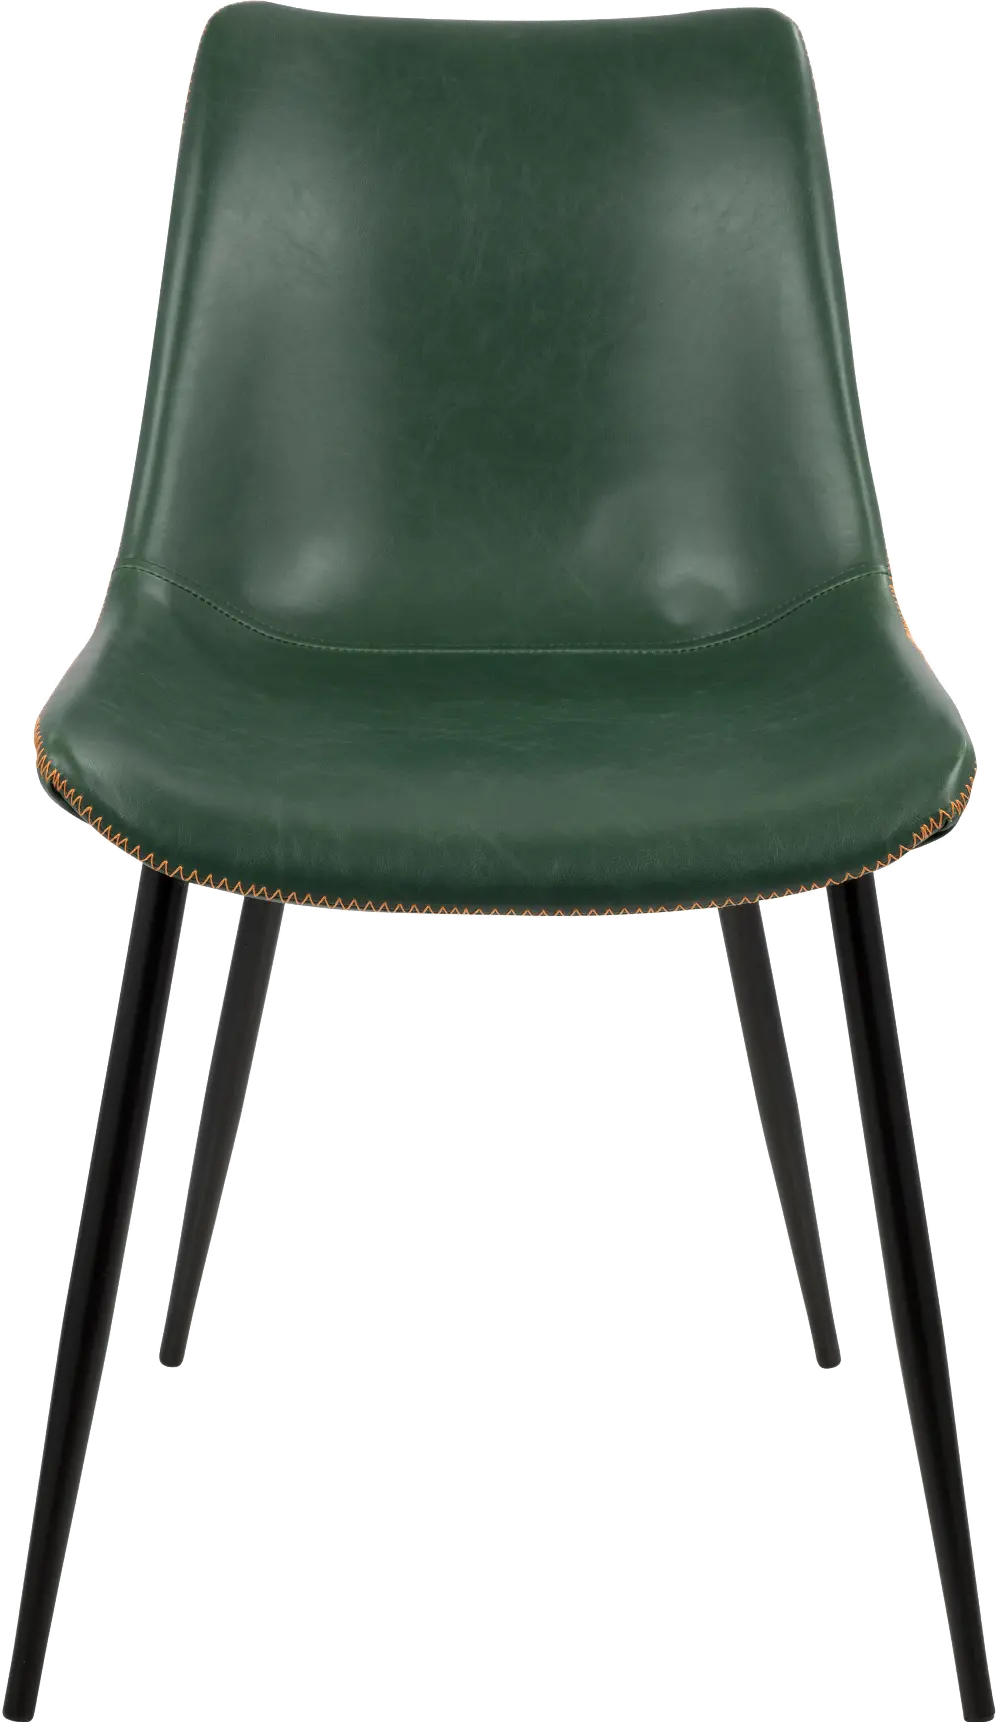 DC-DRNG-BK-GN2 Industrial Green Dining Room Chairs (Set of 2) - Durango-1